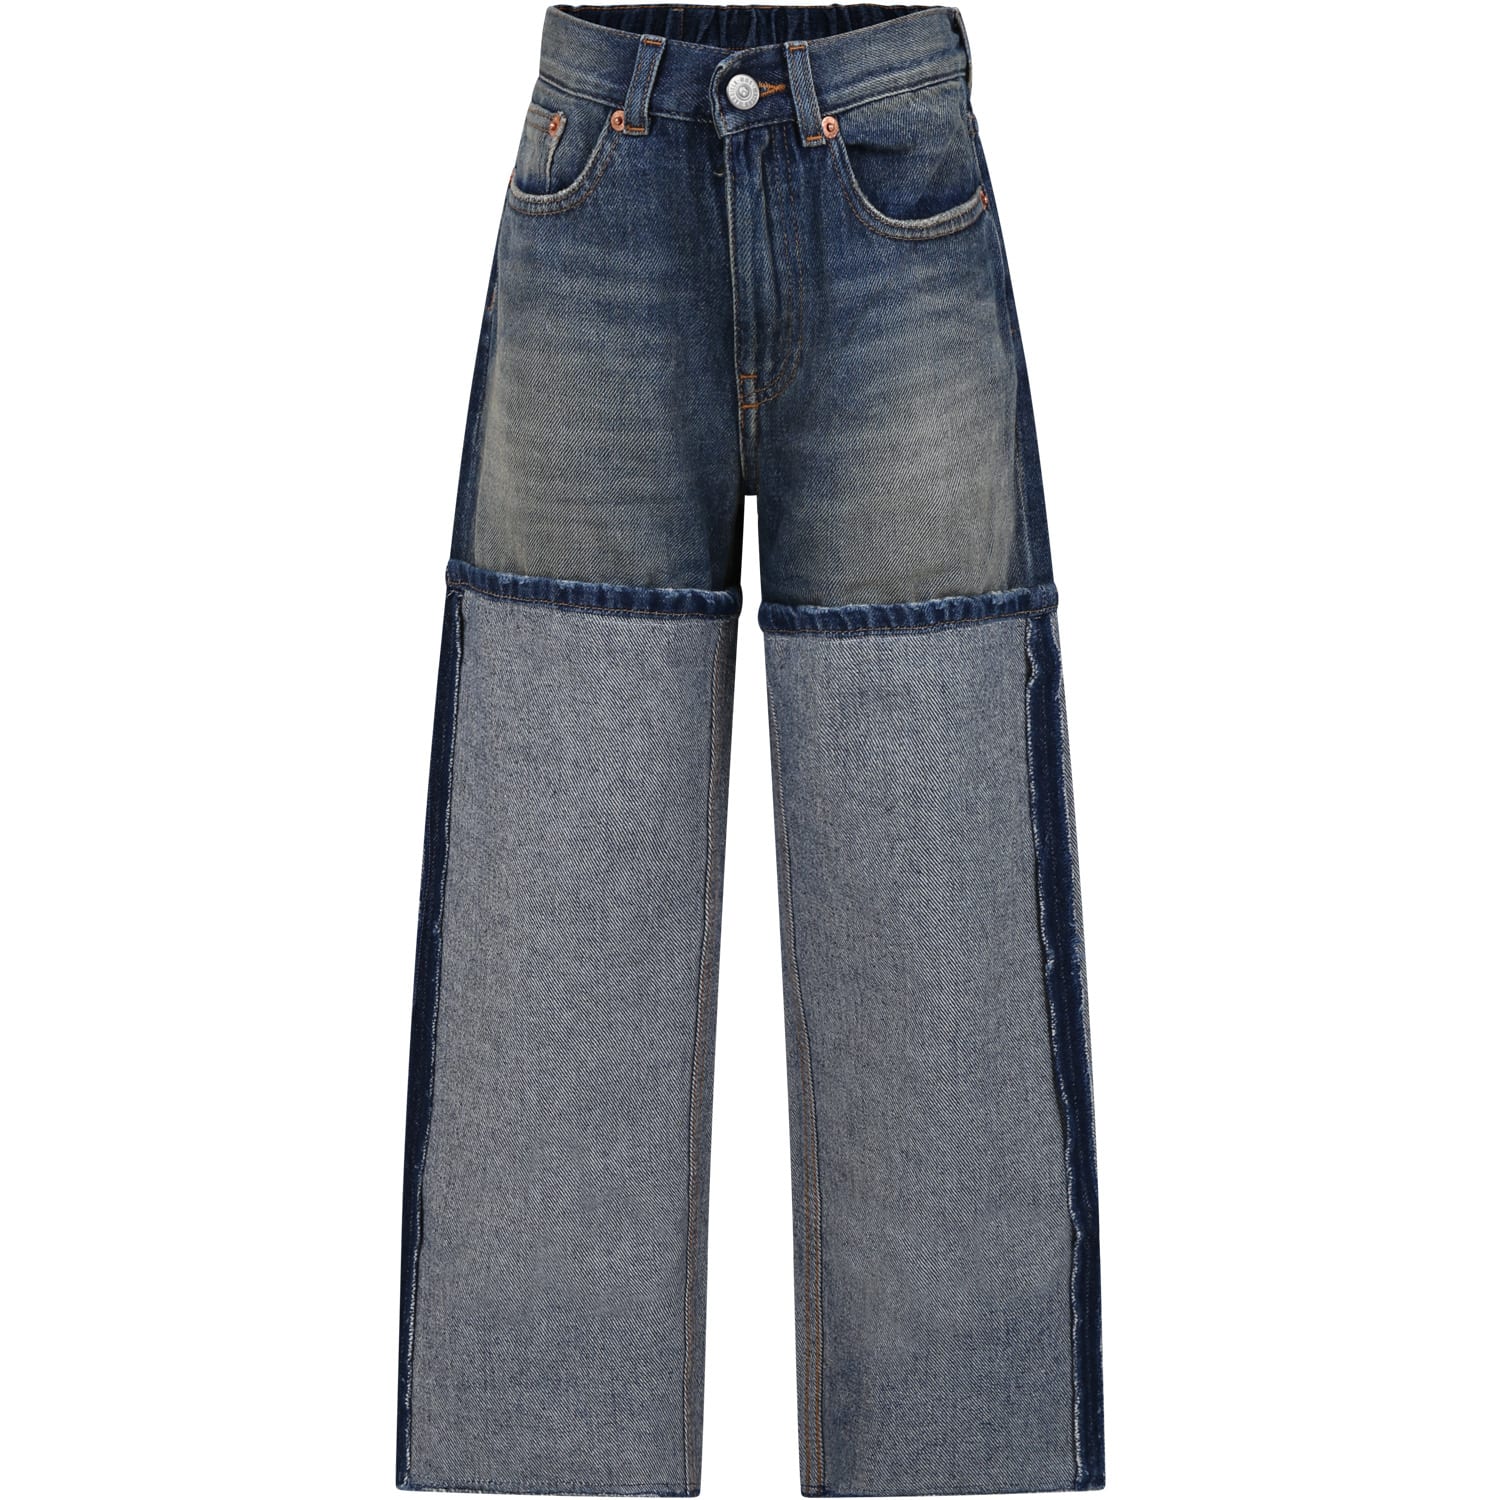 Mm6 Maison Margiela Kids' Denim Jeans For Girl With Contrasting Stitching